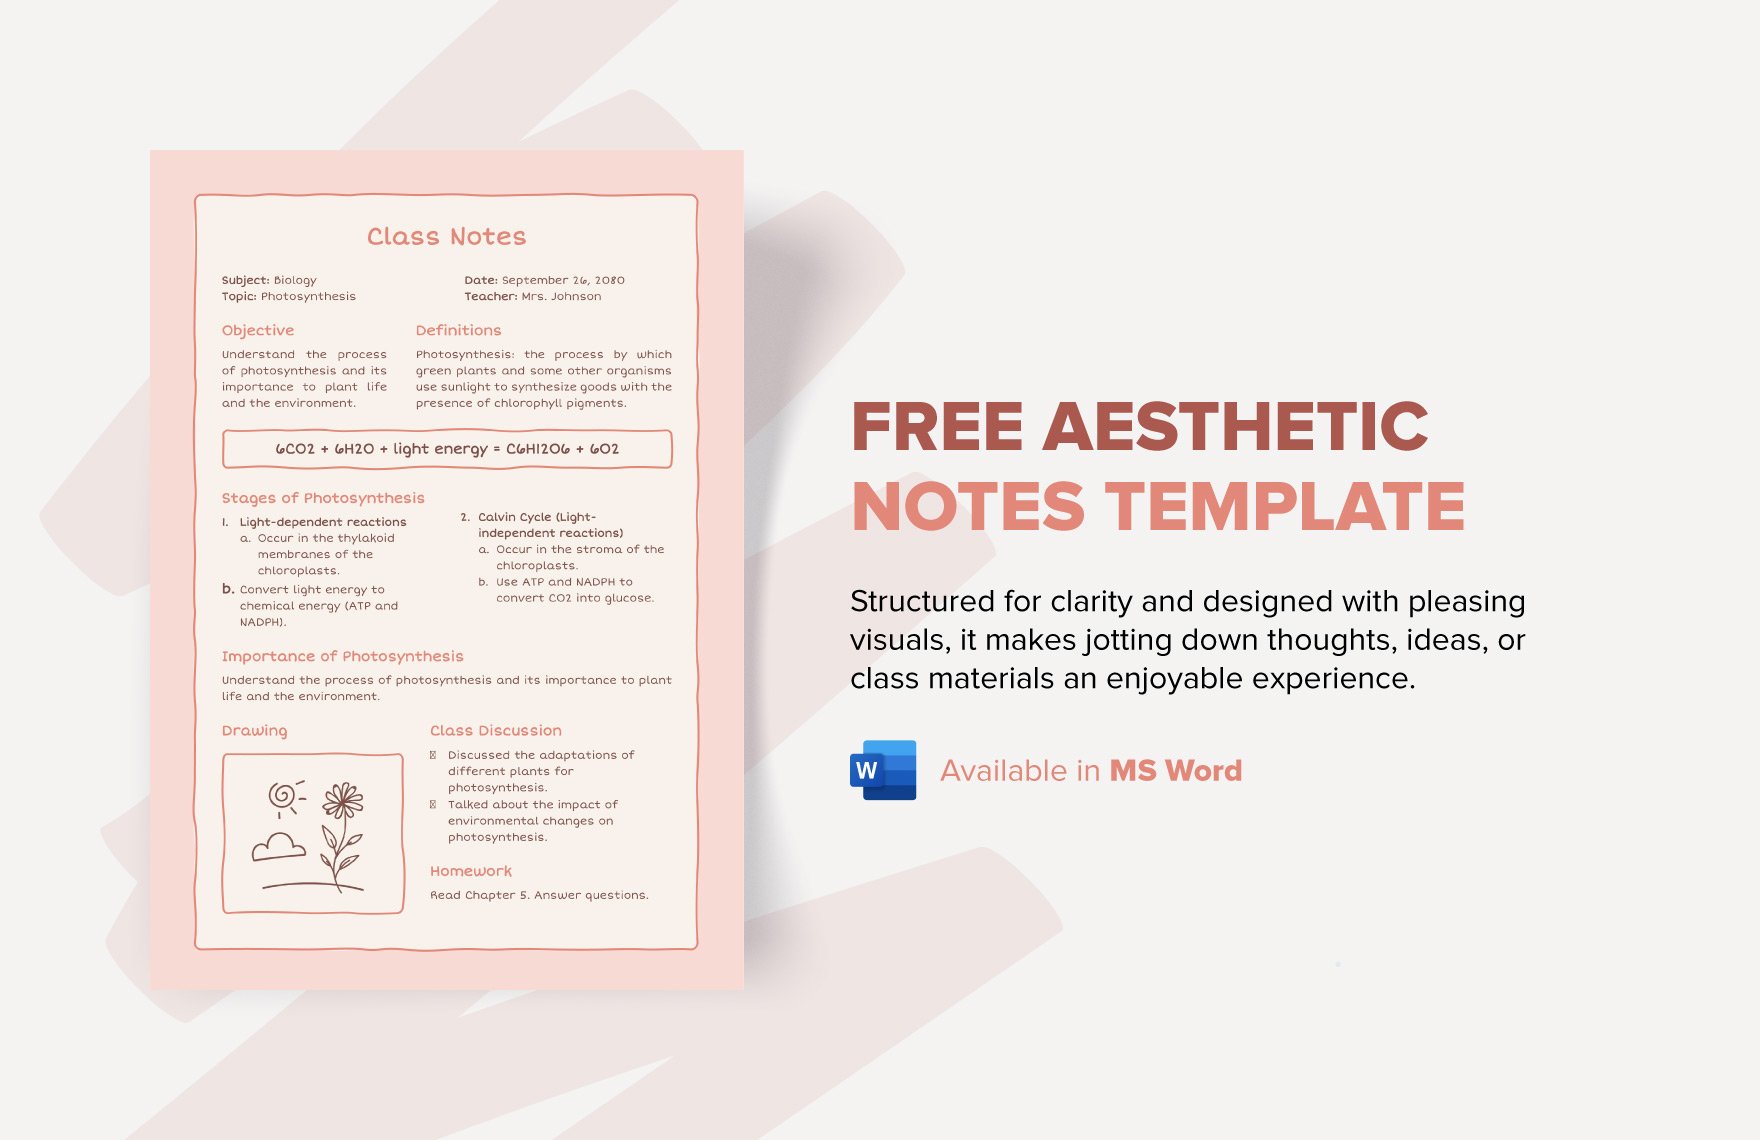 Free Aesthetic Notes Template - Download in Word, Apple Pages ...